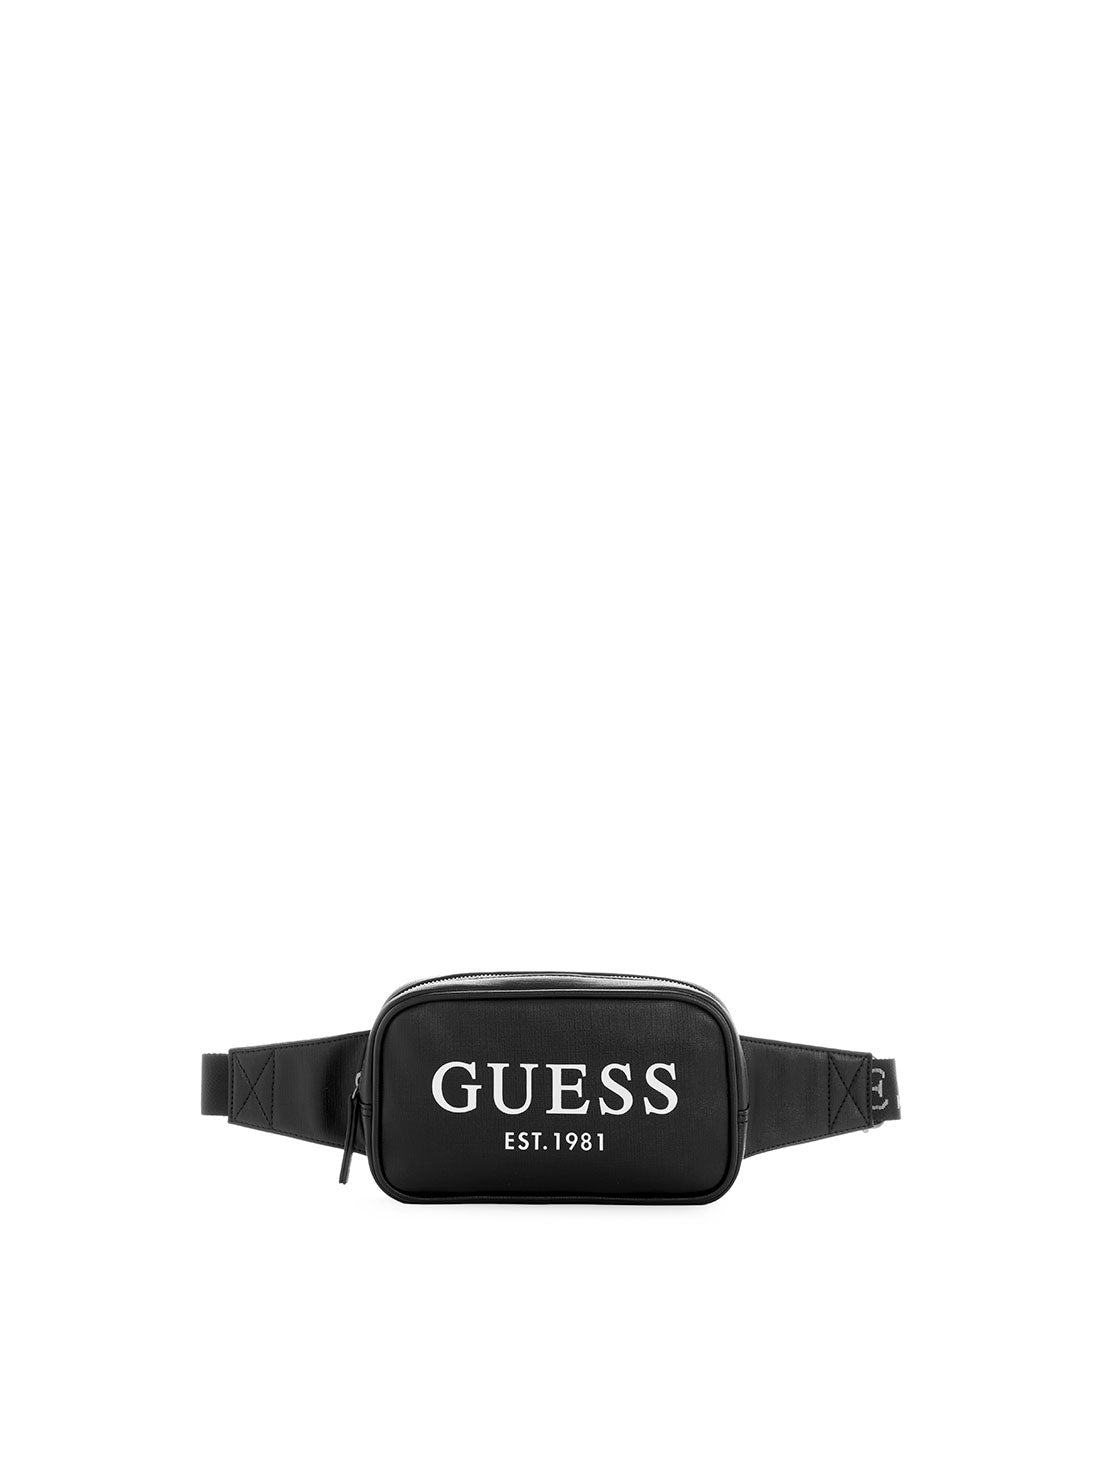 GUESS Black Outfitter Bum Bag front view